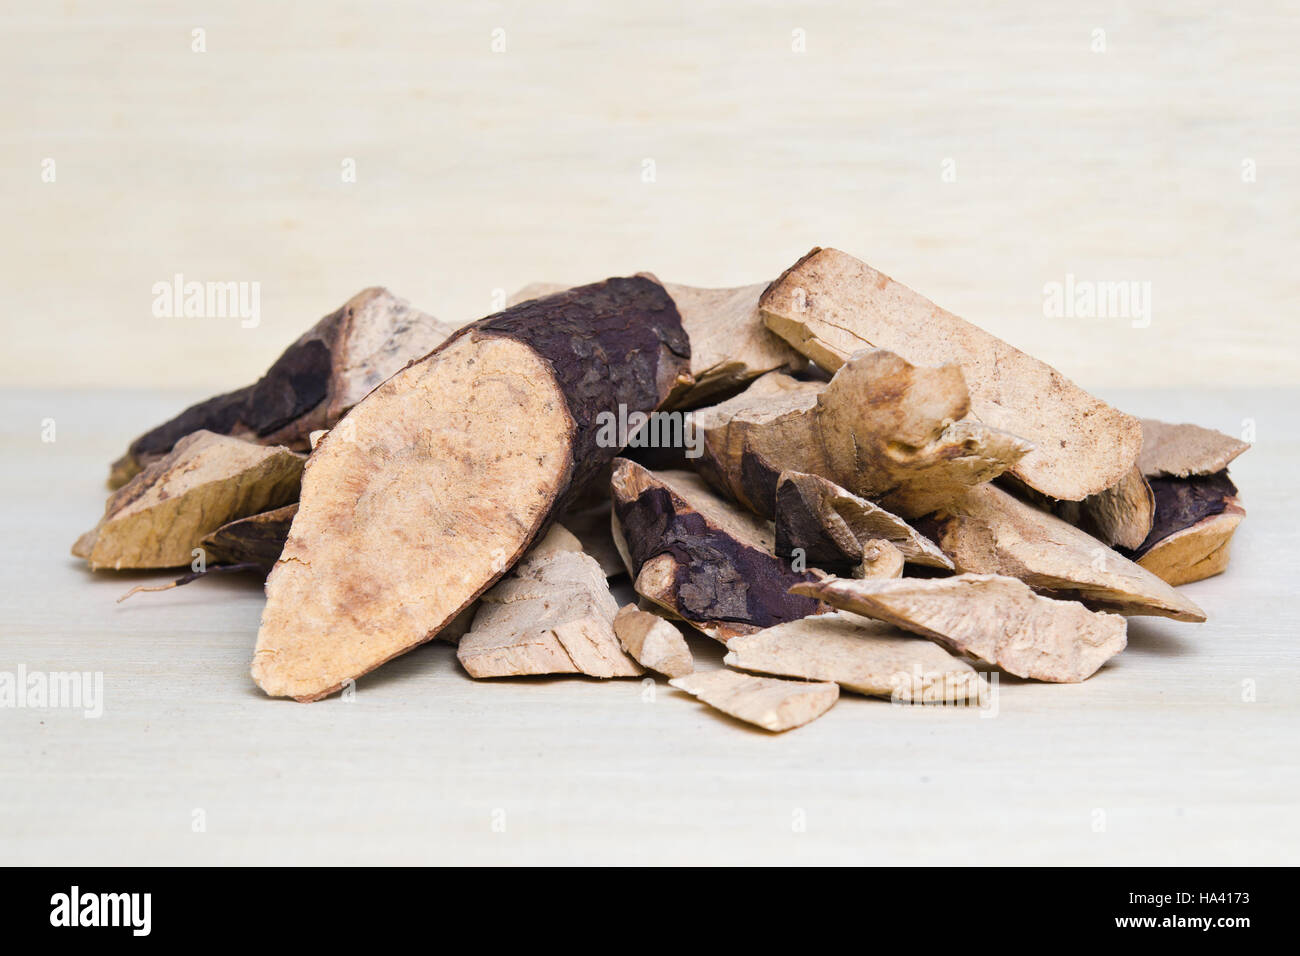 Trigonostemon reidioides Kurz Craib (also named as herb oldtang red, or Mrs. Saint) isolated on wood. Boiled root can ease tuberculosis, cure asthma, Stock Photo